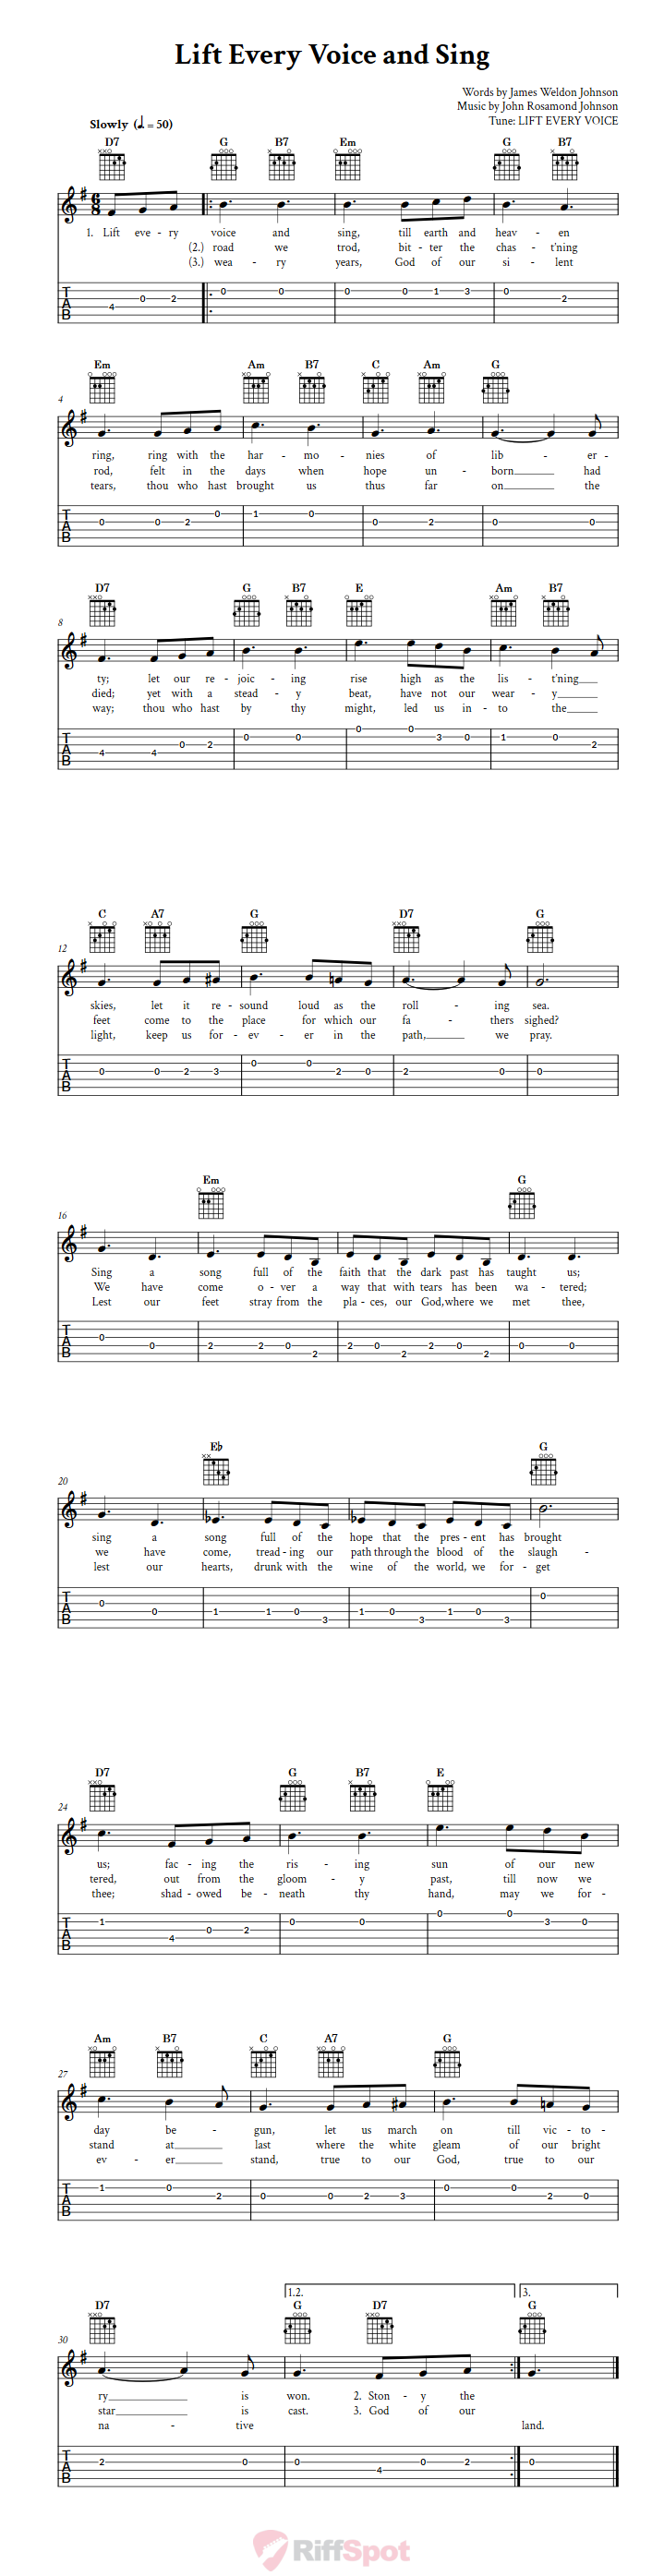 Lift Every Voice and Sing Guitar Tab